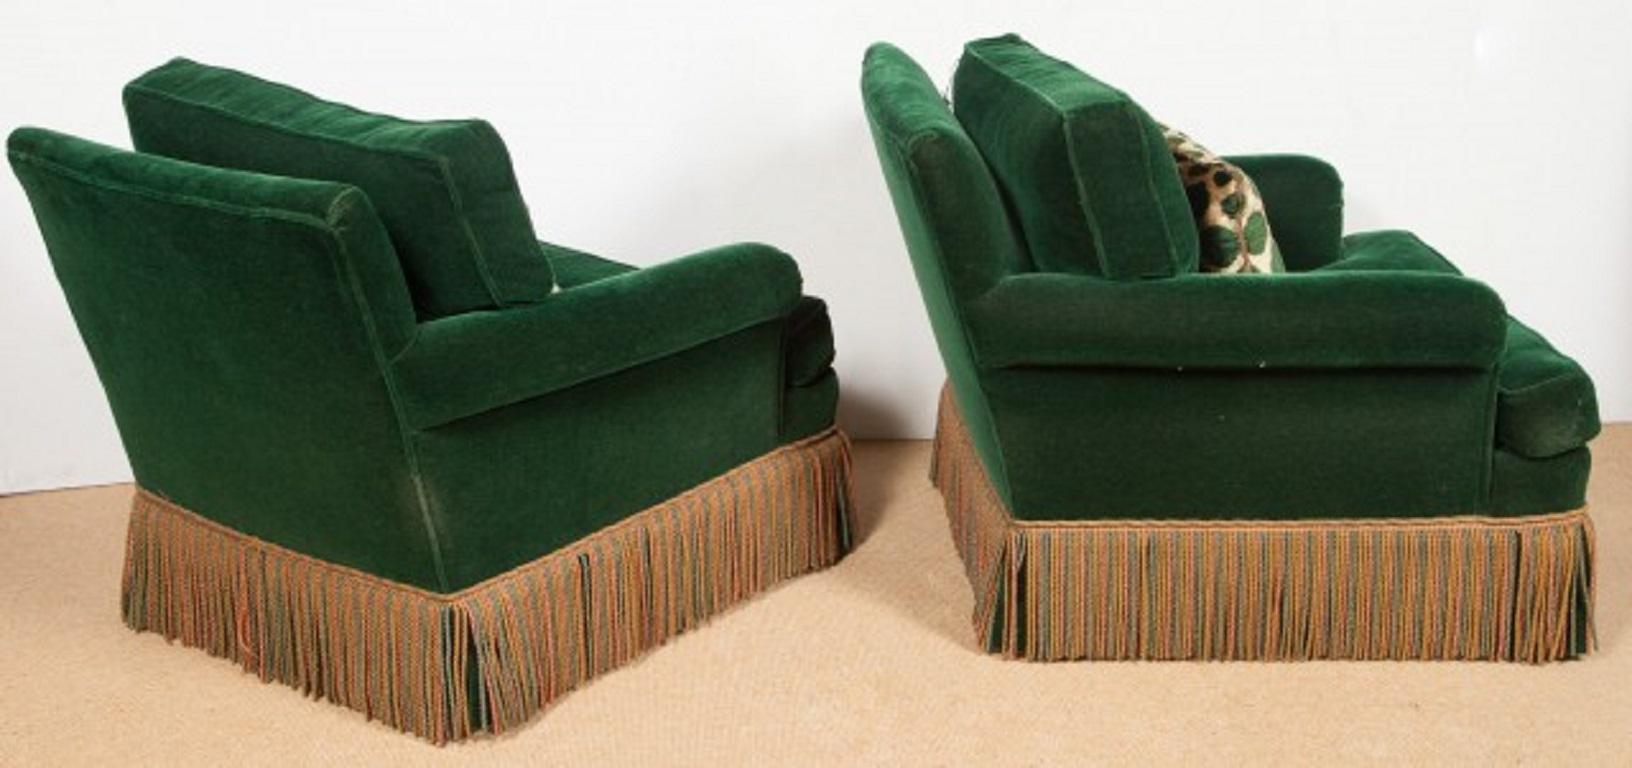 Pair of 1940s Art Deco green velvet upholstered lounge / club chairs.  The chairs have fringed skirts and the original velvet fabric. The pillows are not original, but nicely done.  There is a pair of matching ottomans listed and sold separately. 